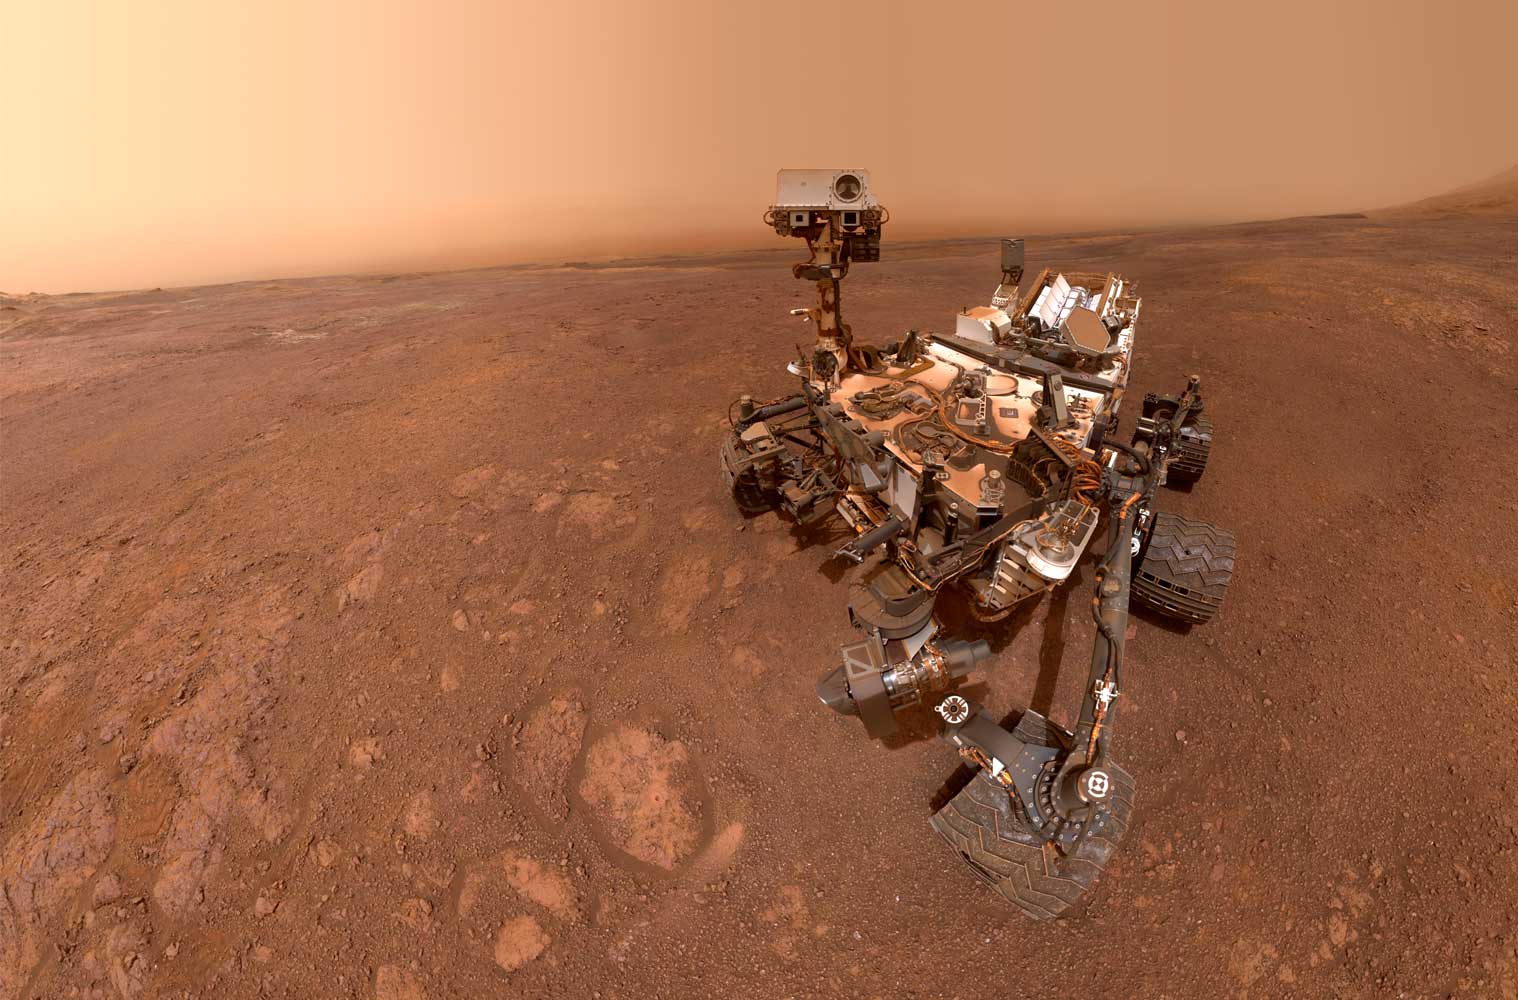 The Curiosity Mars rover sits on the dusty red surface of Mars.